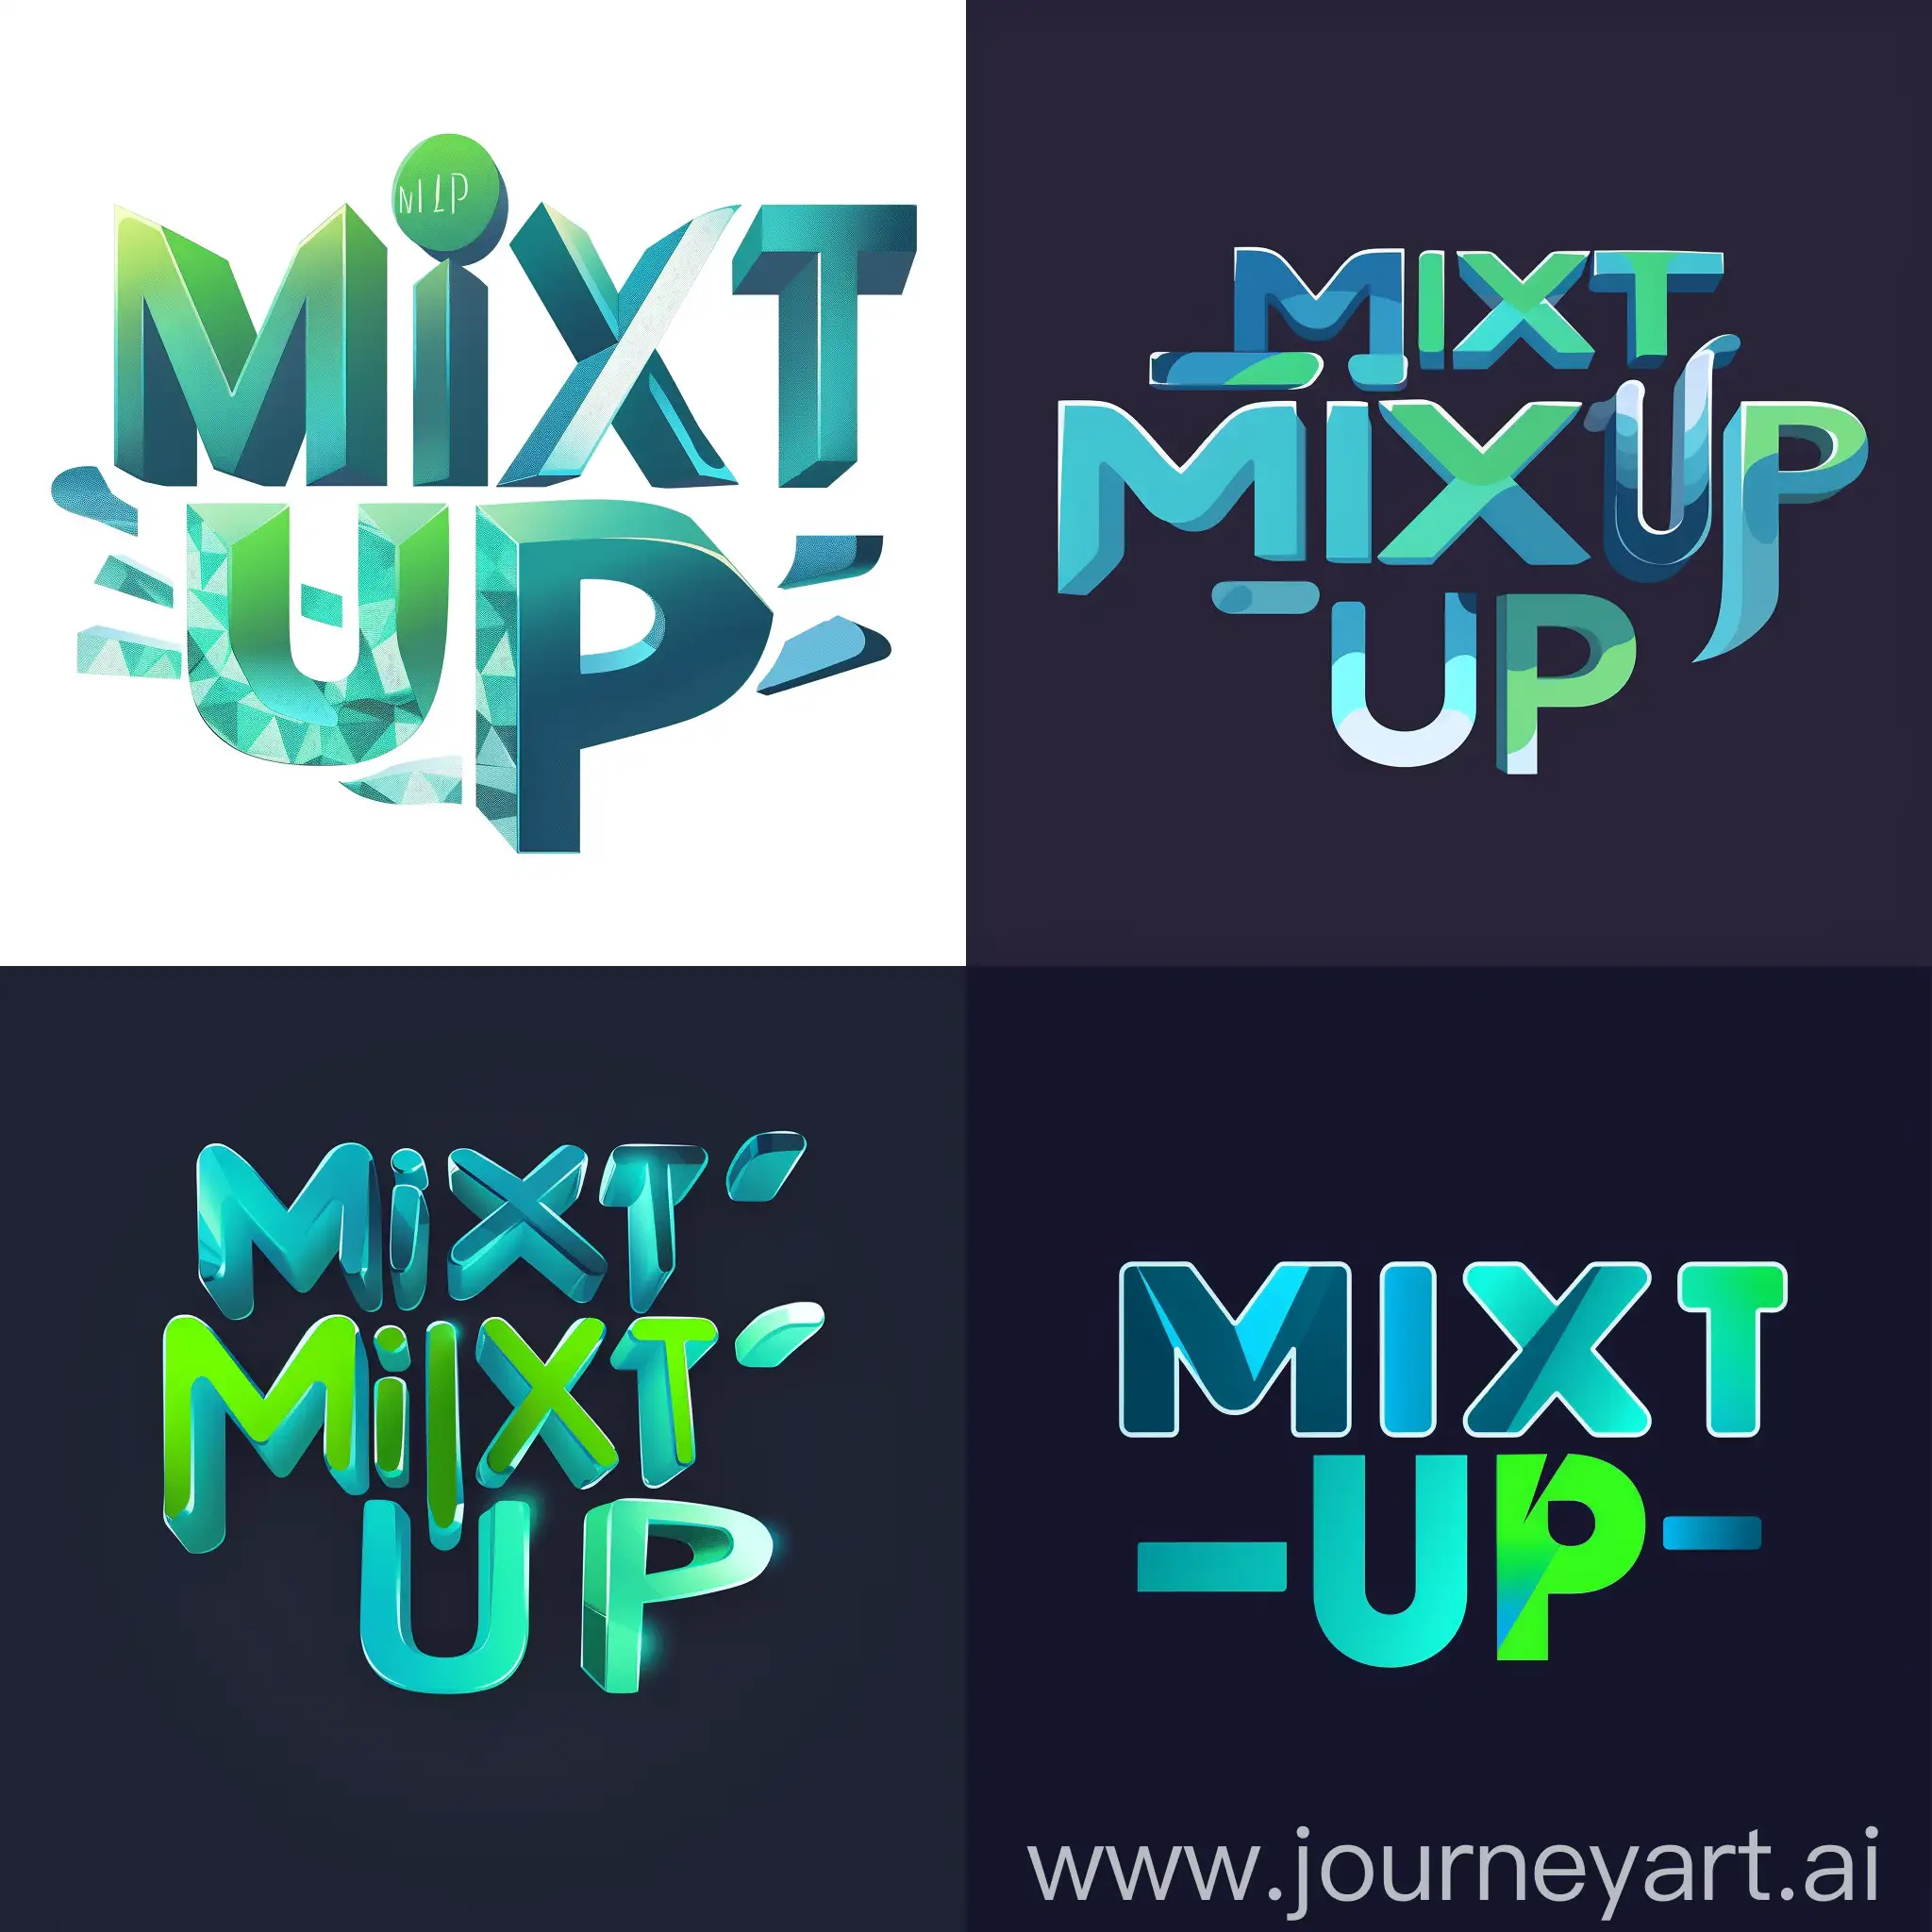 A logo features sleek and modern typography with "MIXT" in bold uppercase letters and "UP" in a lighter weight, positioned slightly above "MIXT". The letters are arranged in a dynamic and interconnected manner, representing the concept of mixing things up and versatility. The color palette consists of a vibrant mix of blue and green tones, evoking a sense of innovation, growth, and freshness. Overall, the design exudes professionalism, creativity, and forward-thinking, reflecting the values and ethos of the affiliate sales company, MIXT-UP.